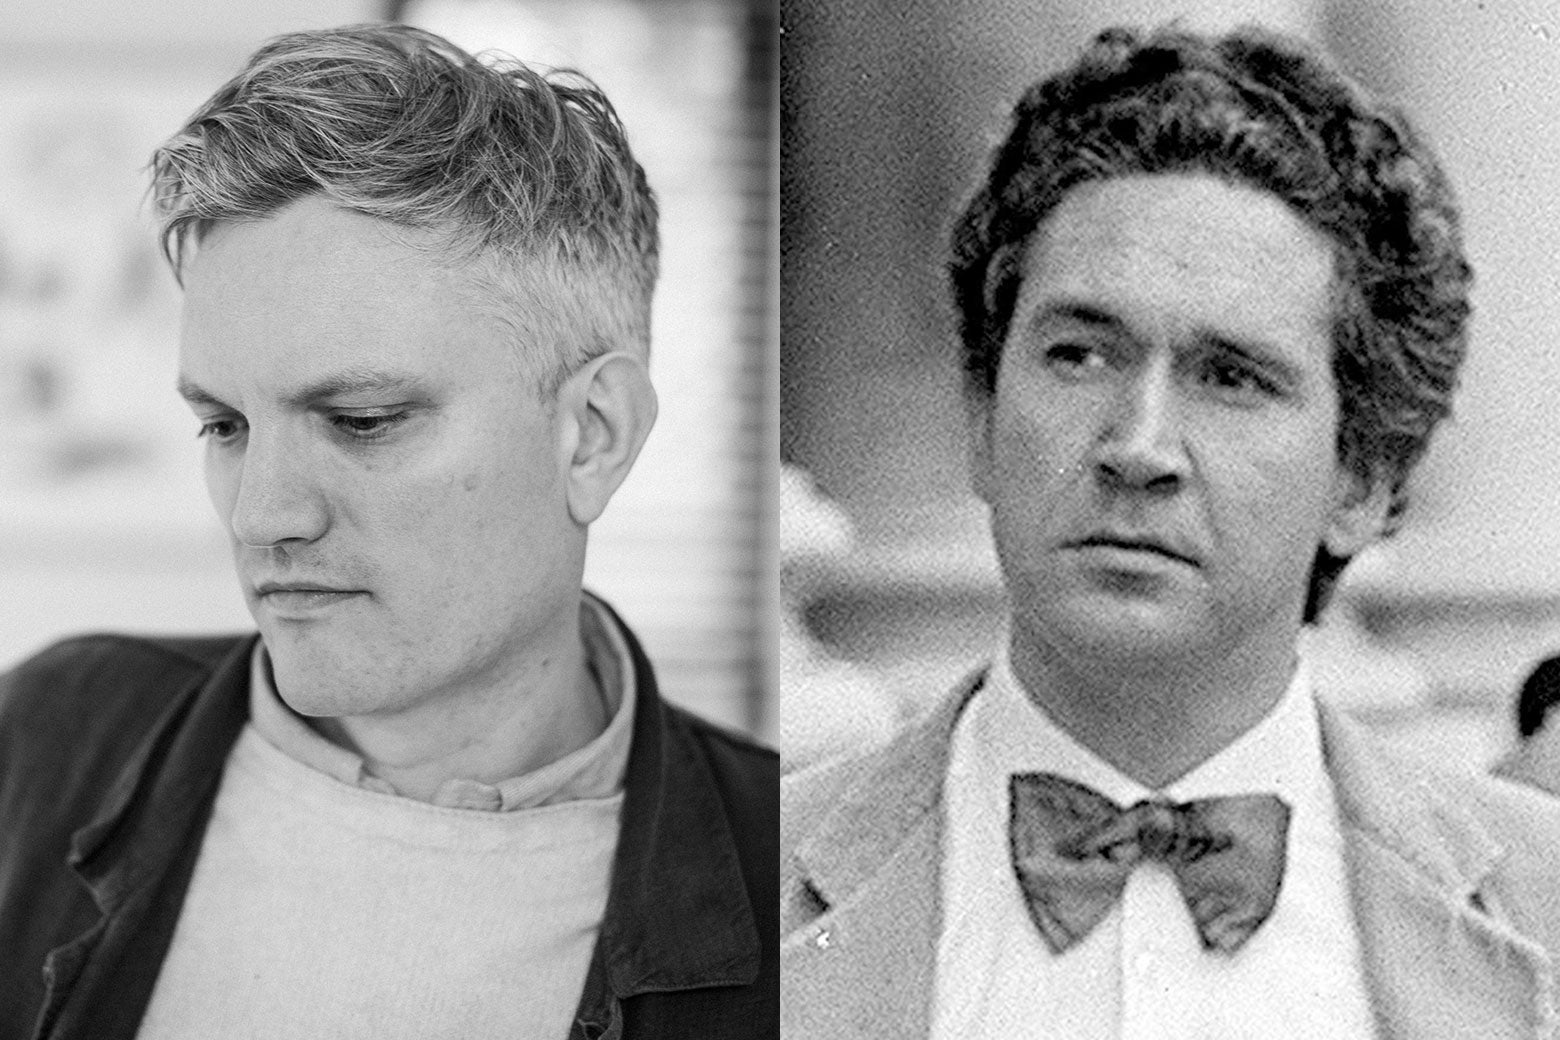 Black-and-white photos of Mark O'Connell (left) and Malcolm Macarthur are juxtaposed.